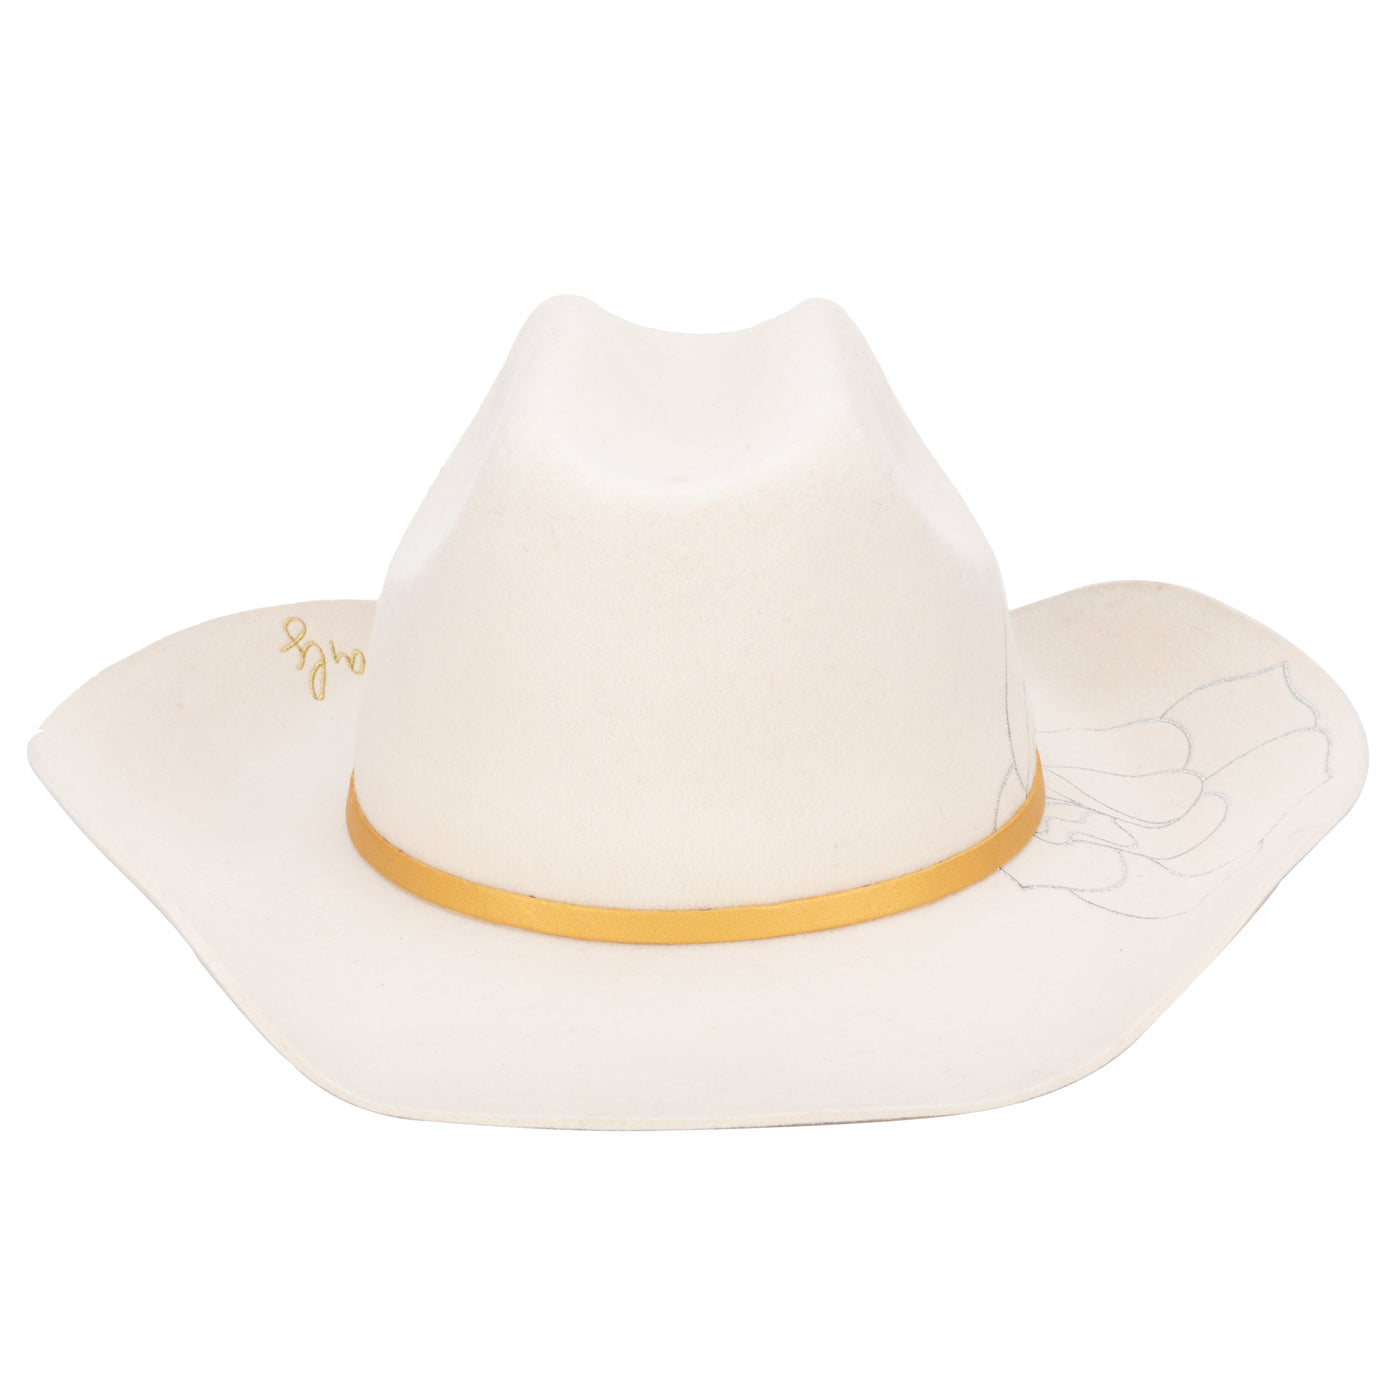 COWBOY - Love Never Fails - Women's Felt Cowboy With Embroidered Rose